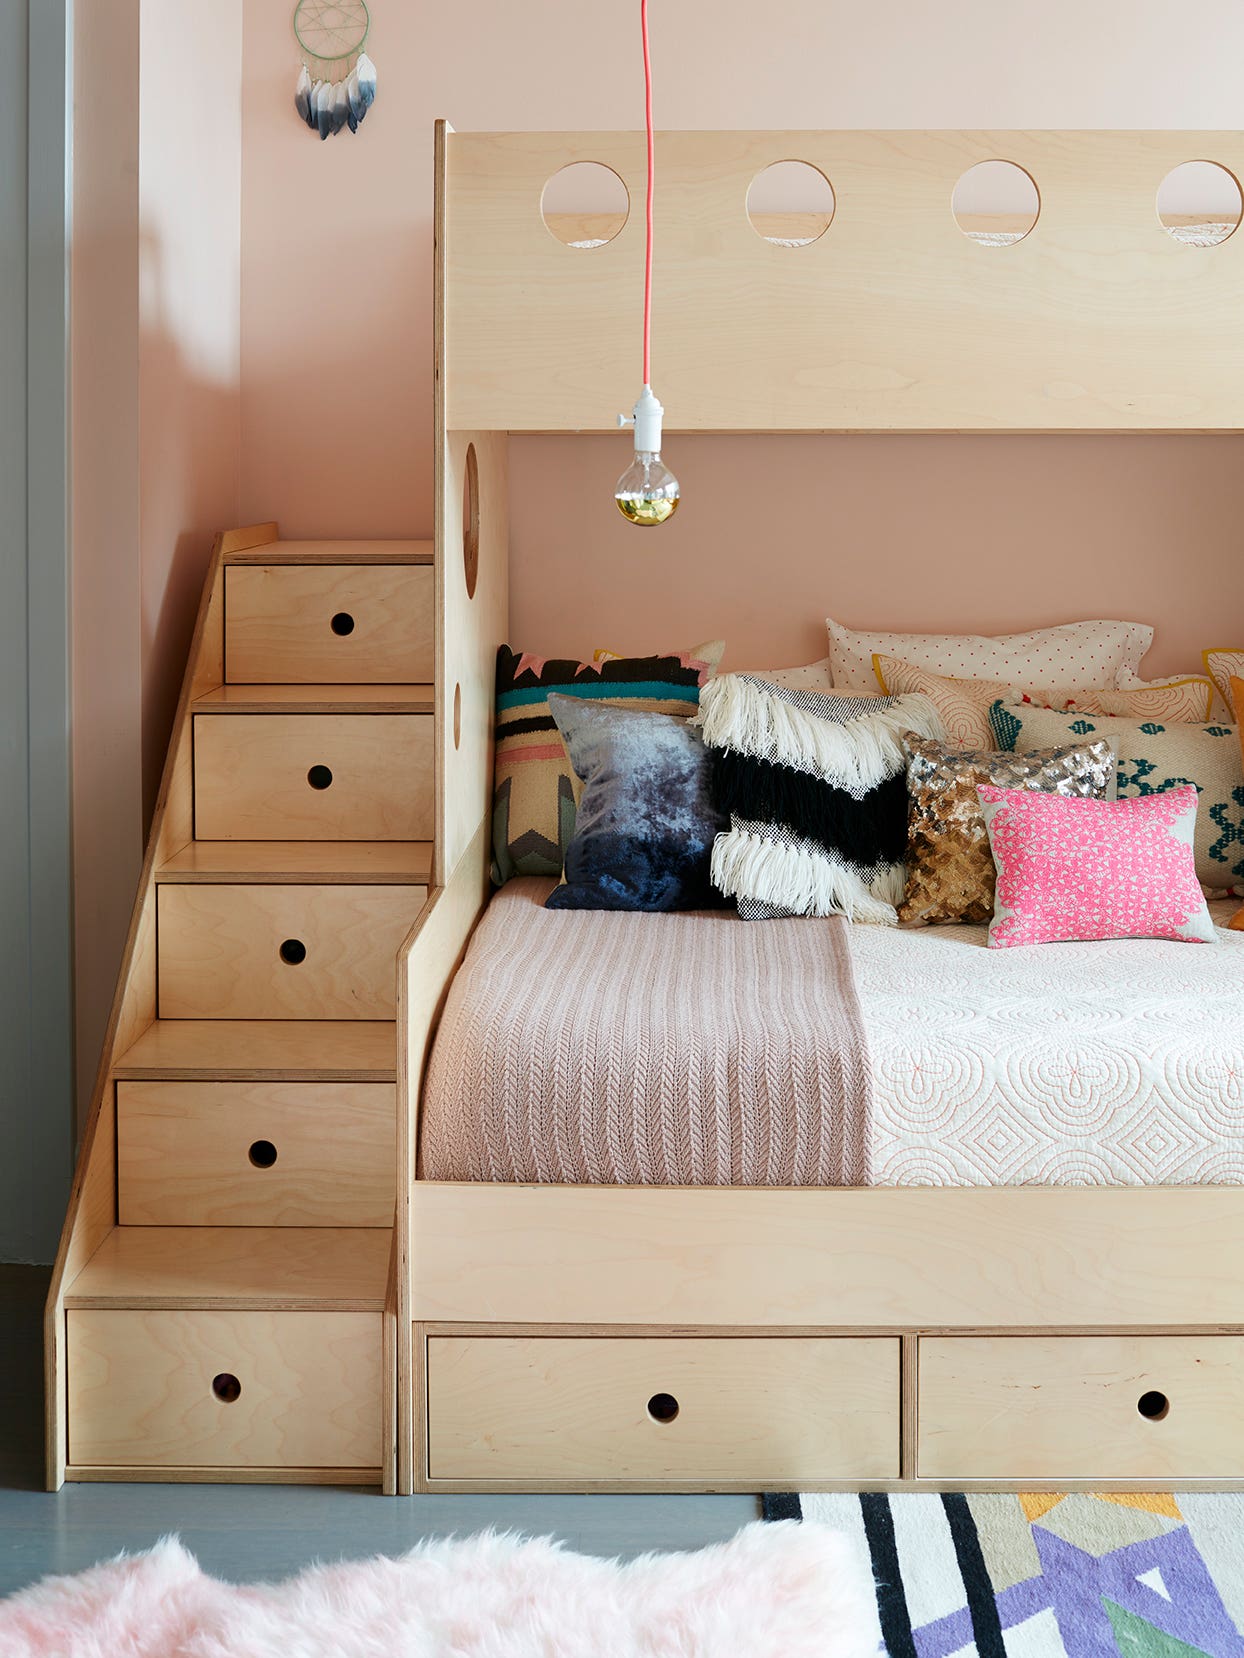 These 6 Built-In Kids’ Beds Are a Step Above the Rest